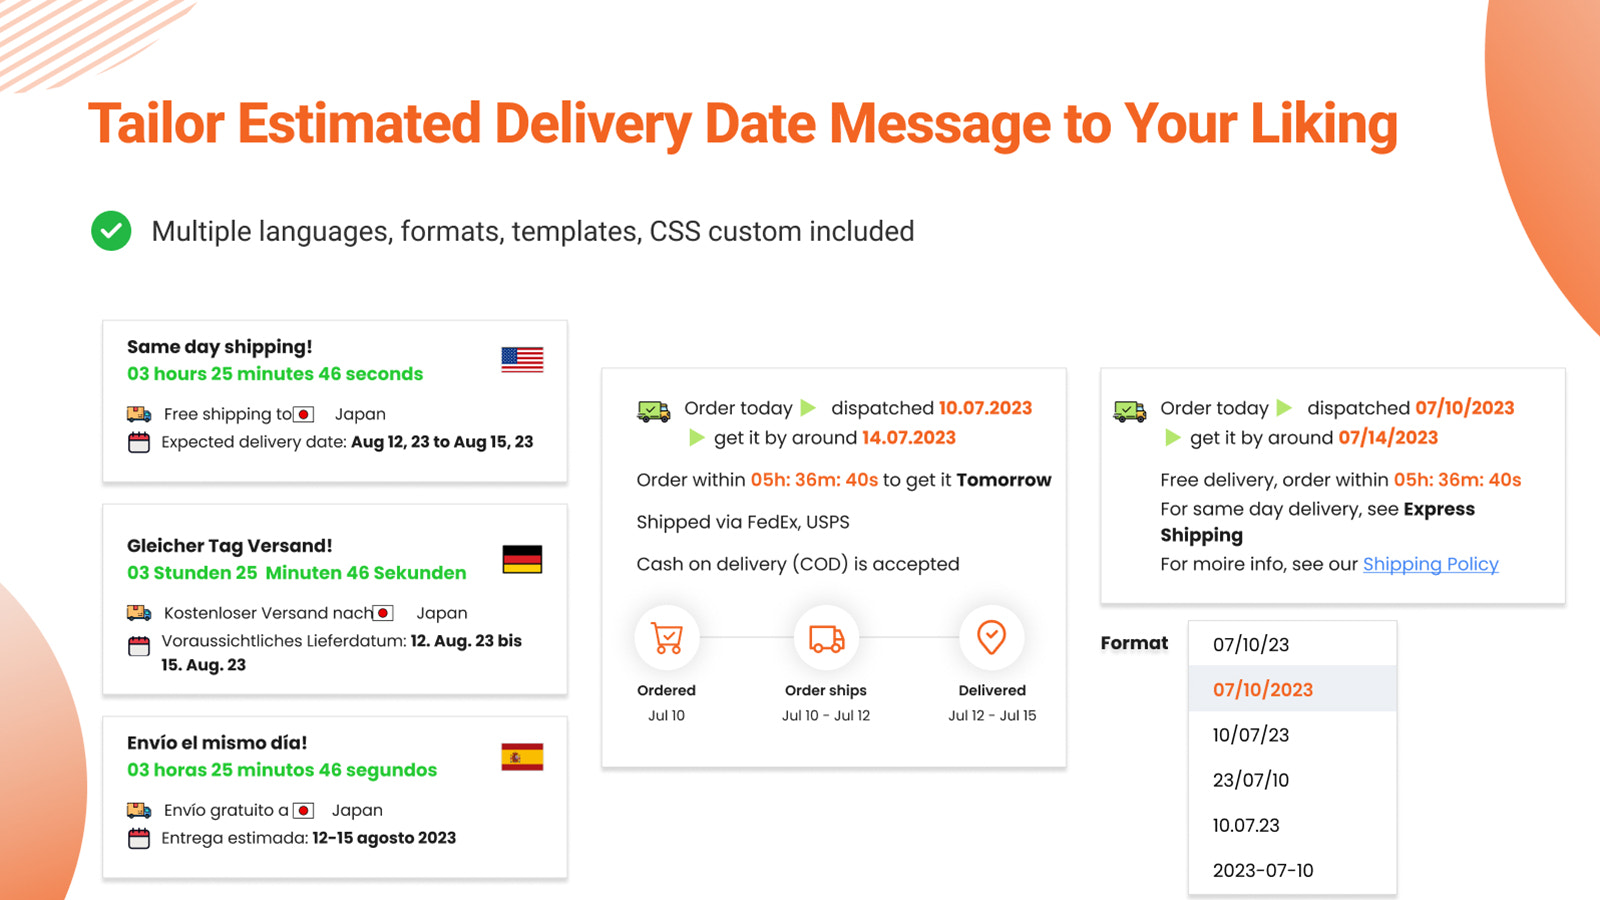 How Accurate Are 's Estimated Delivery Dates?